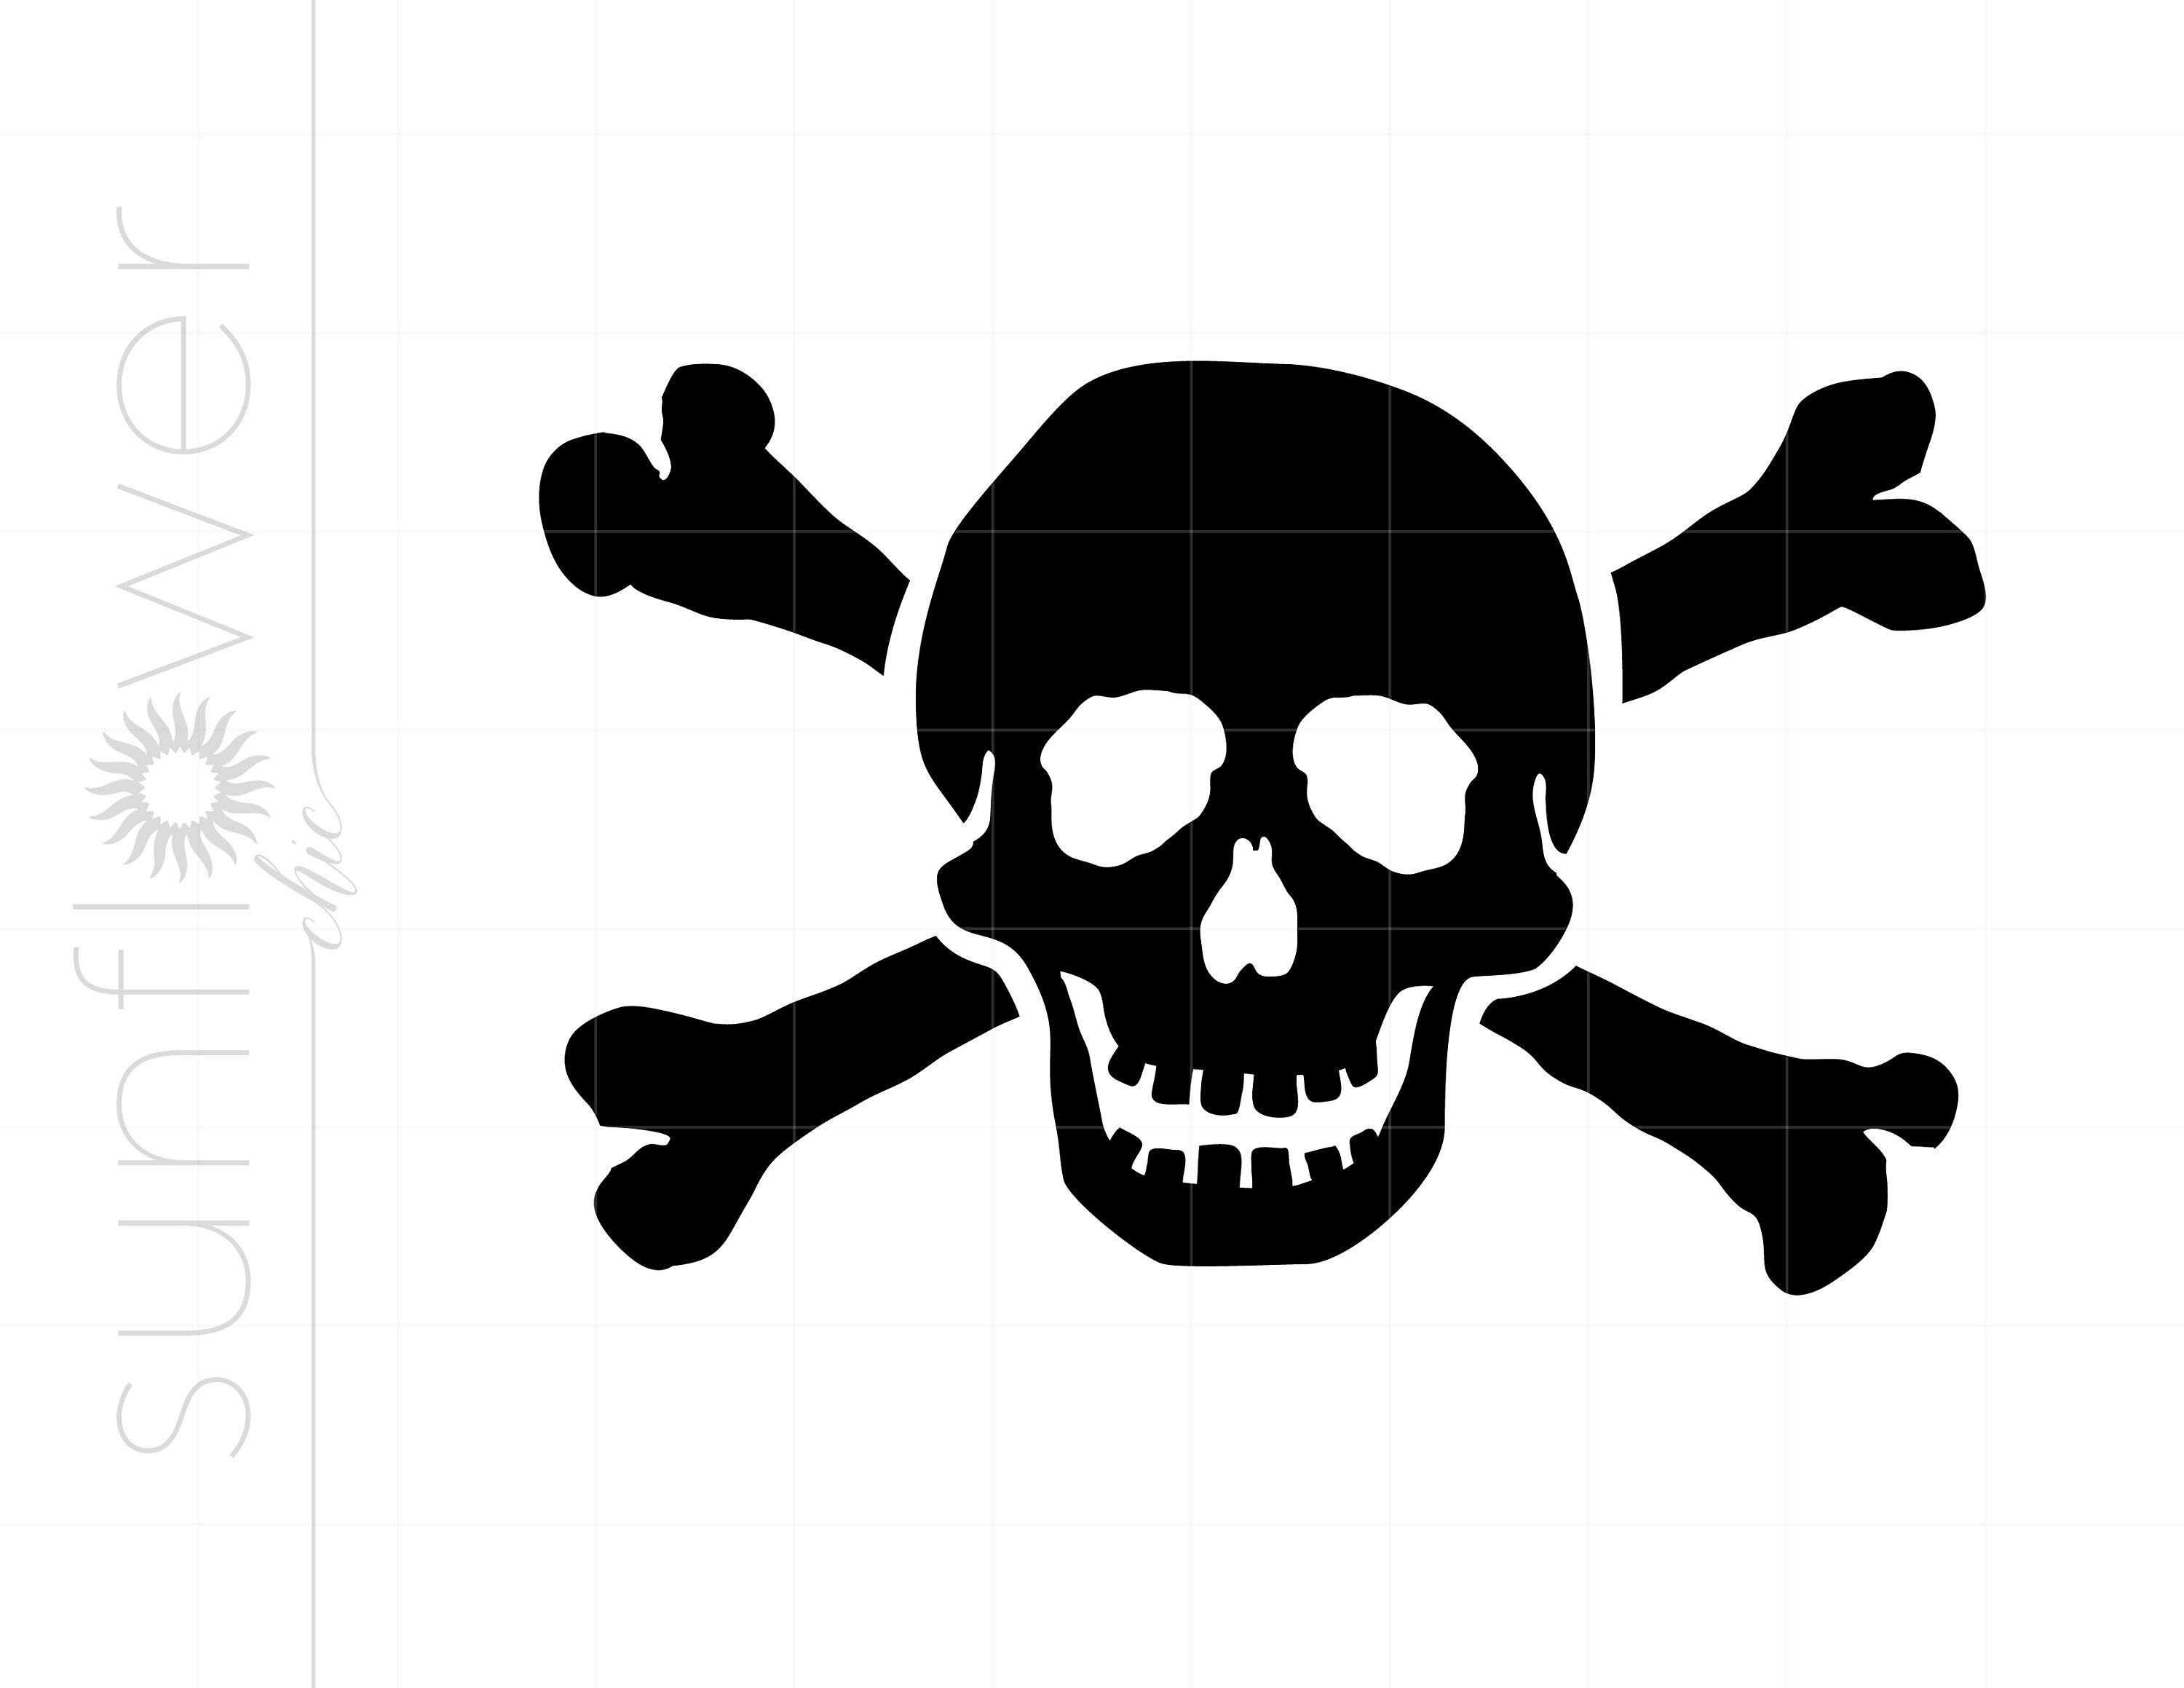 File:Skull and Crossbones.svg - Wikimedia Commons